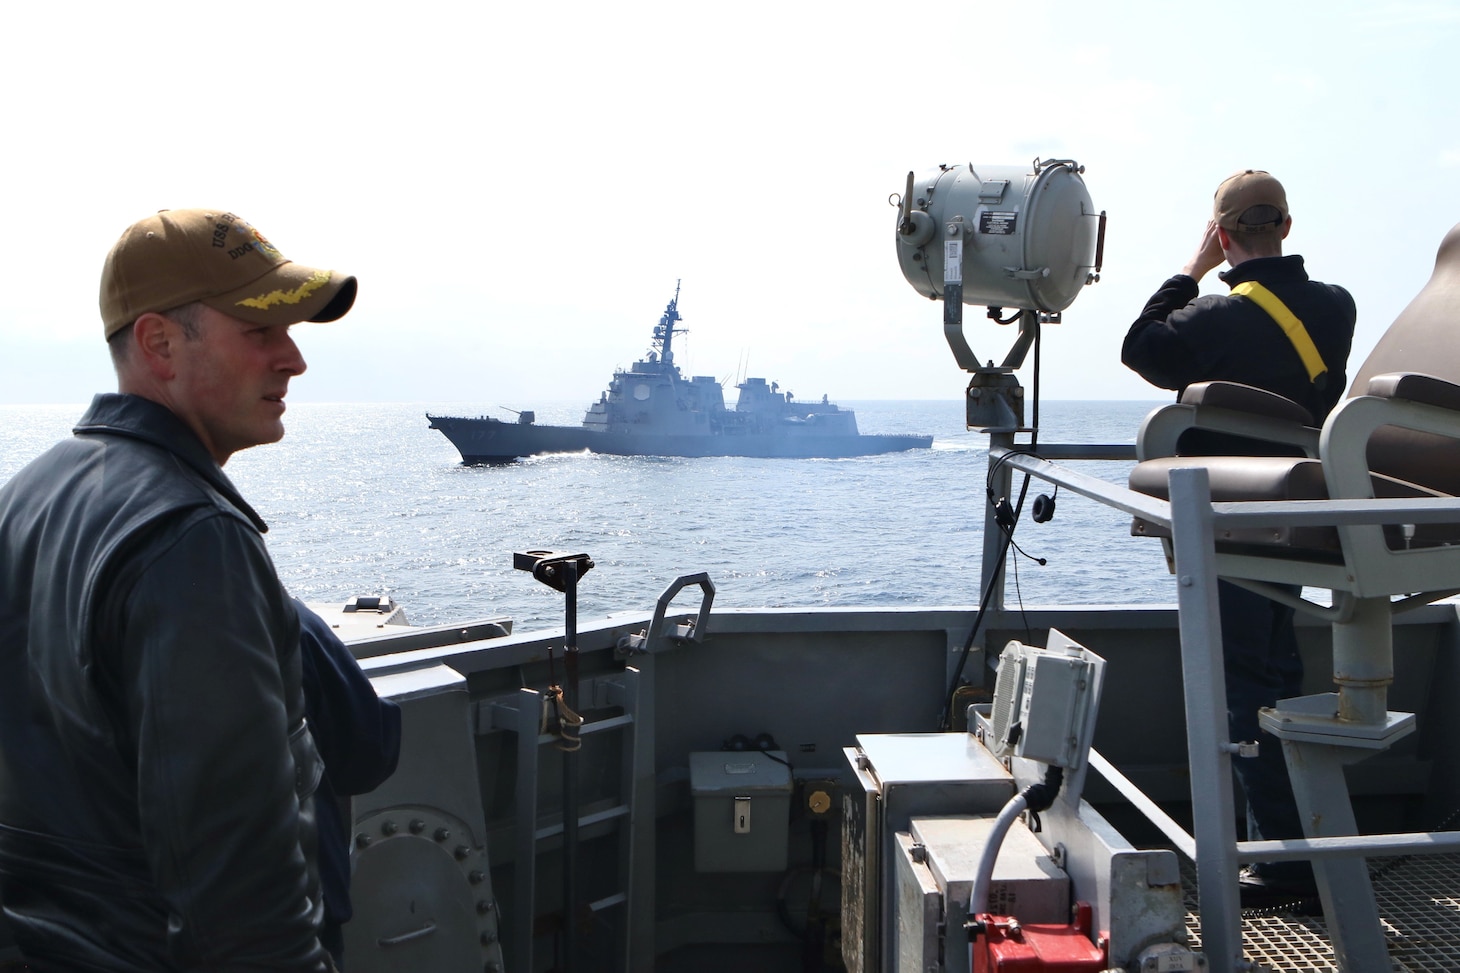 Cmdr. Marcus Seeger, commanding officer of Arleigh Burke-class guided-missile destroyer USS Benfold (DDG 65), directs close-in ship maneuvers alongside Japan Maritime Self-Defense Force guided-missile destroyer JS Atago (DDG 177) and Republic of Korea Navy Sejong the Great-class destroyer ROKS YulGok Yi I (DDG 992) during a trilateral maritime exercise focused on ballistic missile defense integration and shipboard maneuvers. Benfold is underway in the U.S. 7th Fleet area of operations as part of Destroyer Squadron 15. U.S. 7th Fleet is the U.S. Navy‘s largest forward-deployed numbered fleet, and routinely interacts and operates with allies and partners in preserving a free and open Indo-Pacific region. (U.S. Navy photo by Seaman Alexis Pelletier)